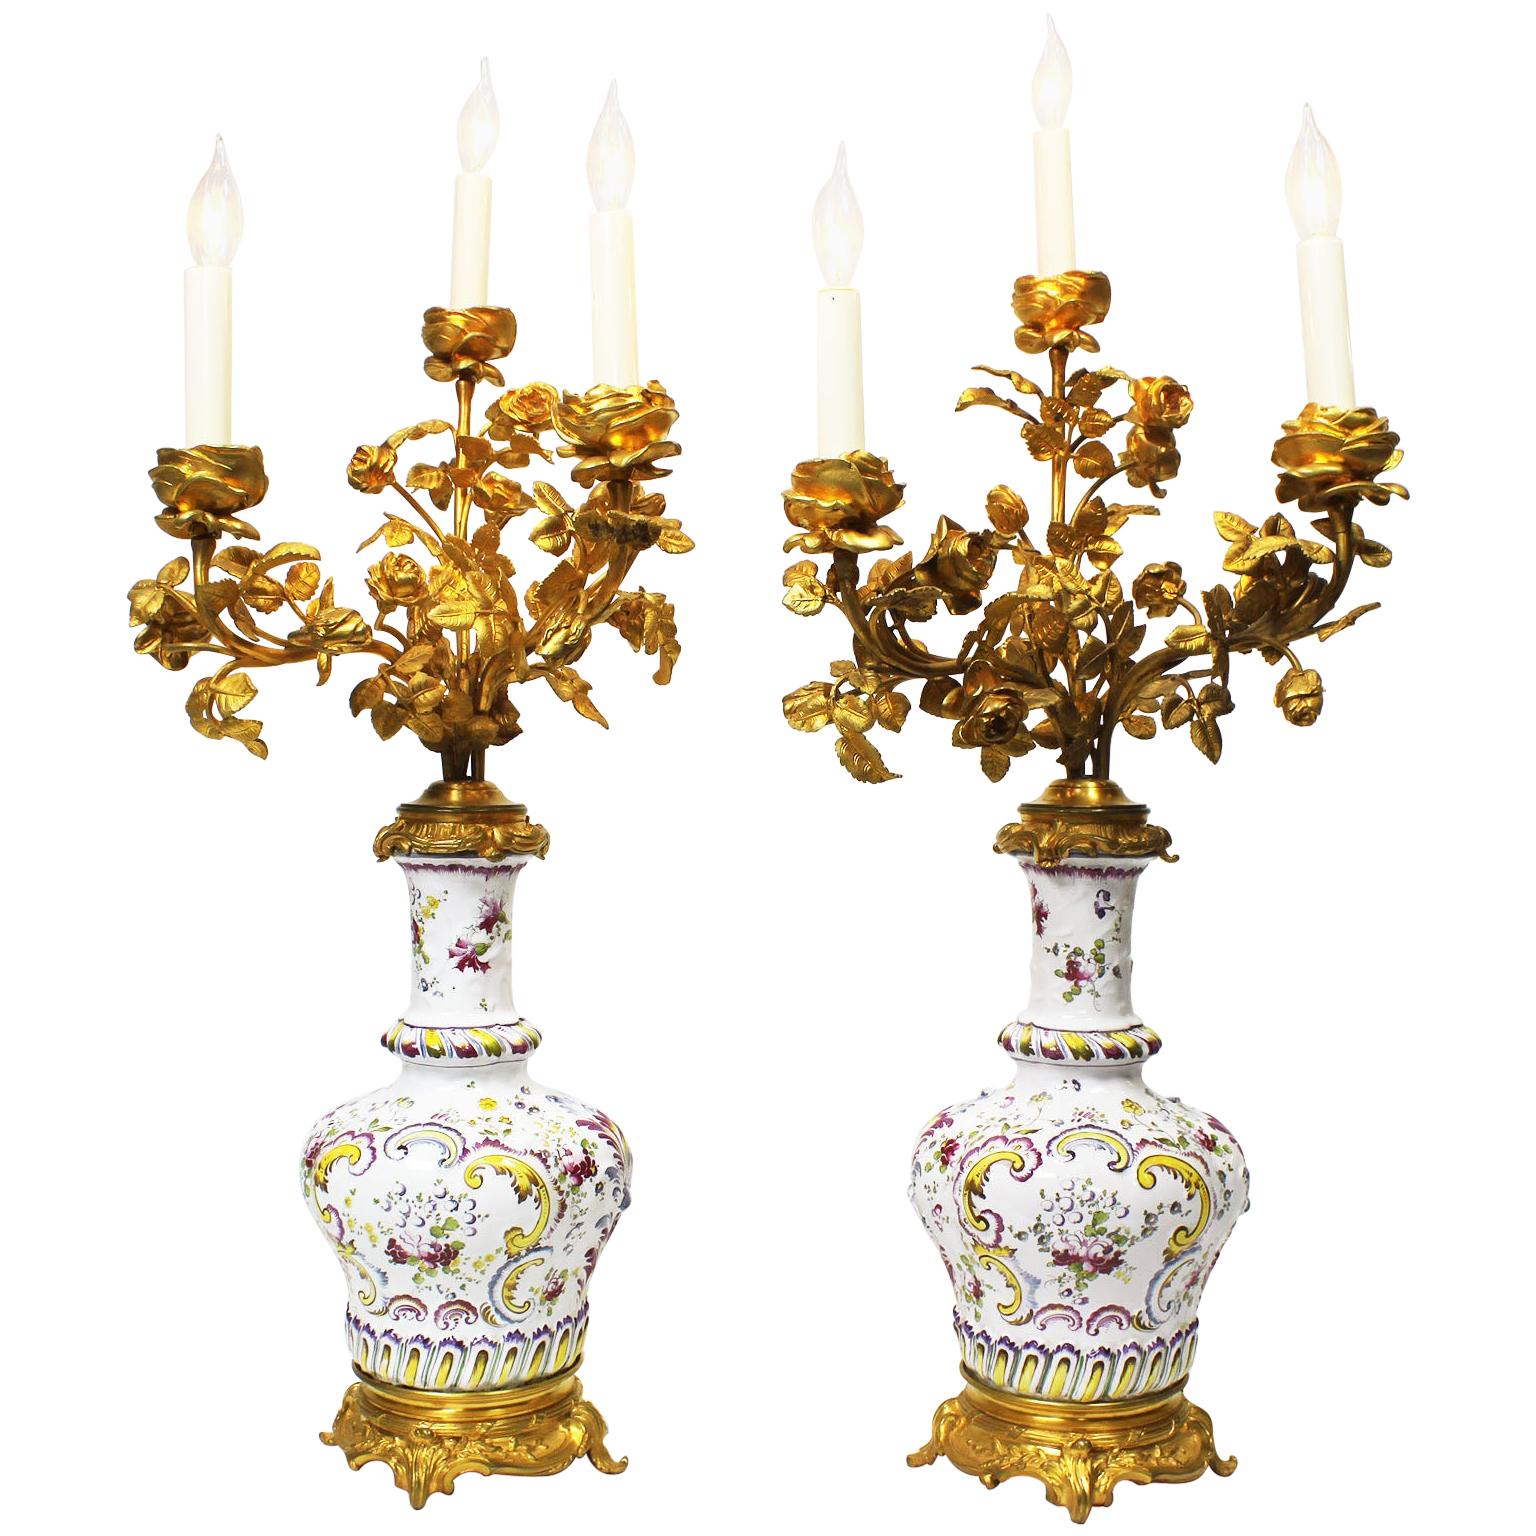 Pair of 19th Century Gilt-Bronze & Faience Porcelain Table Lamp Candelabras For Sale